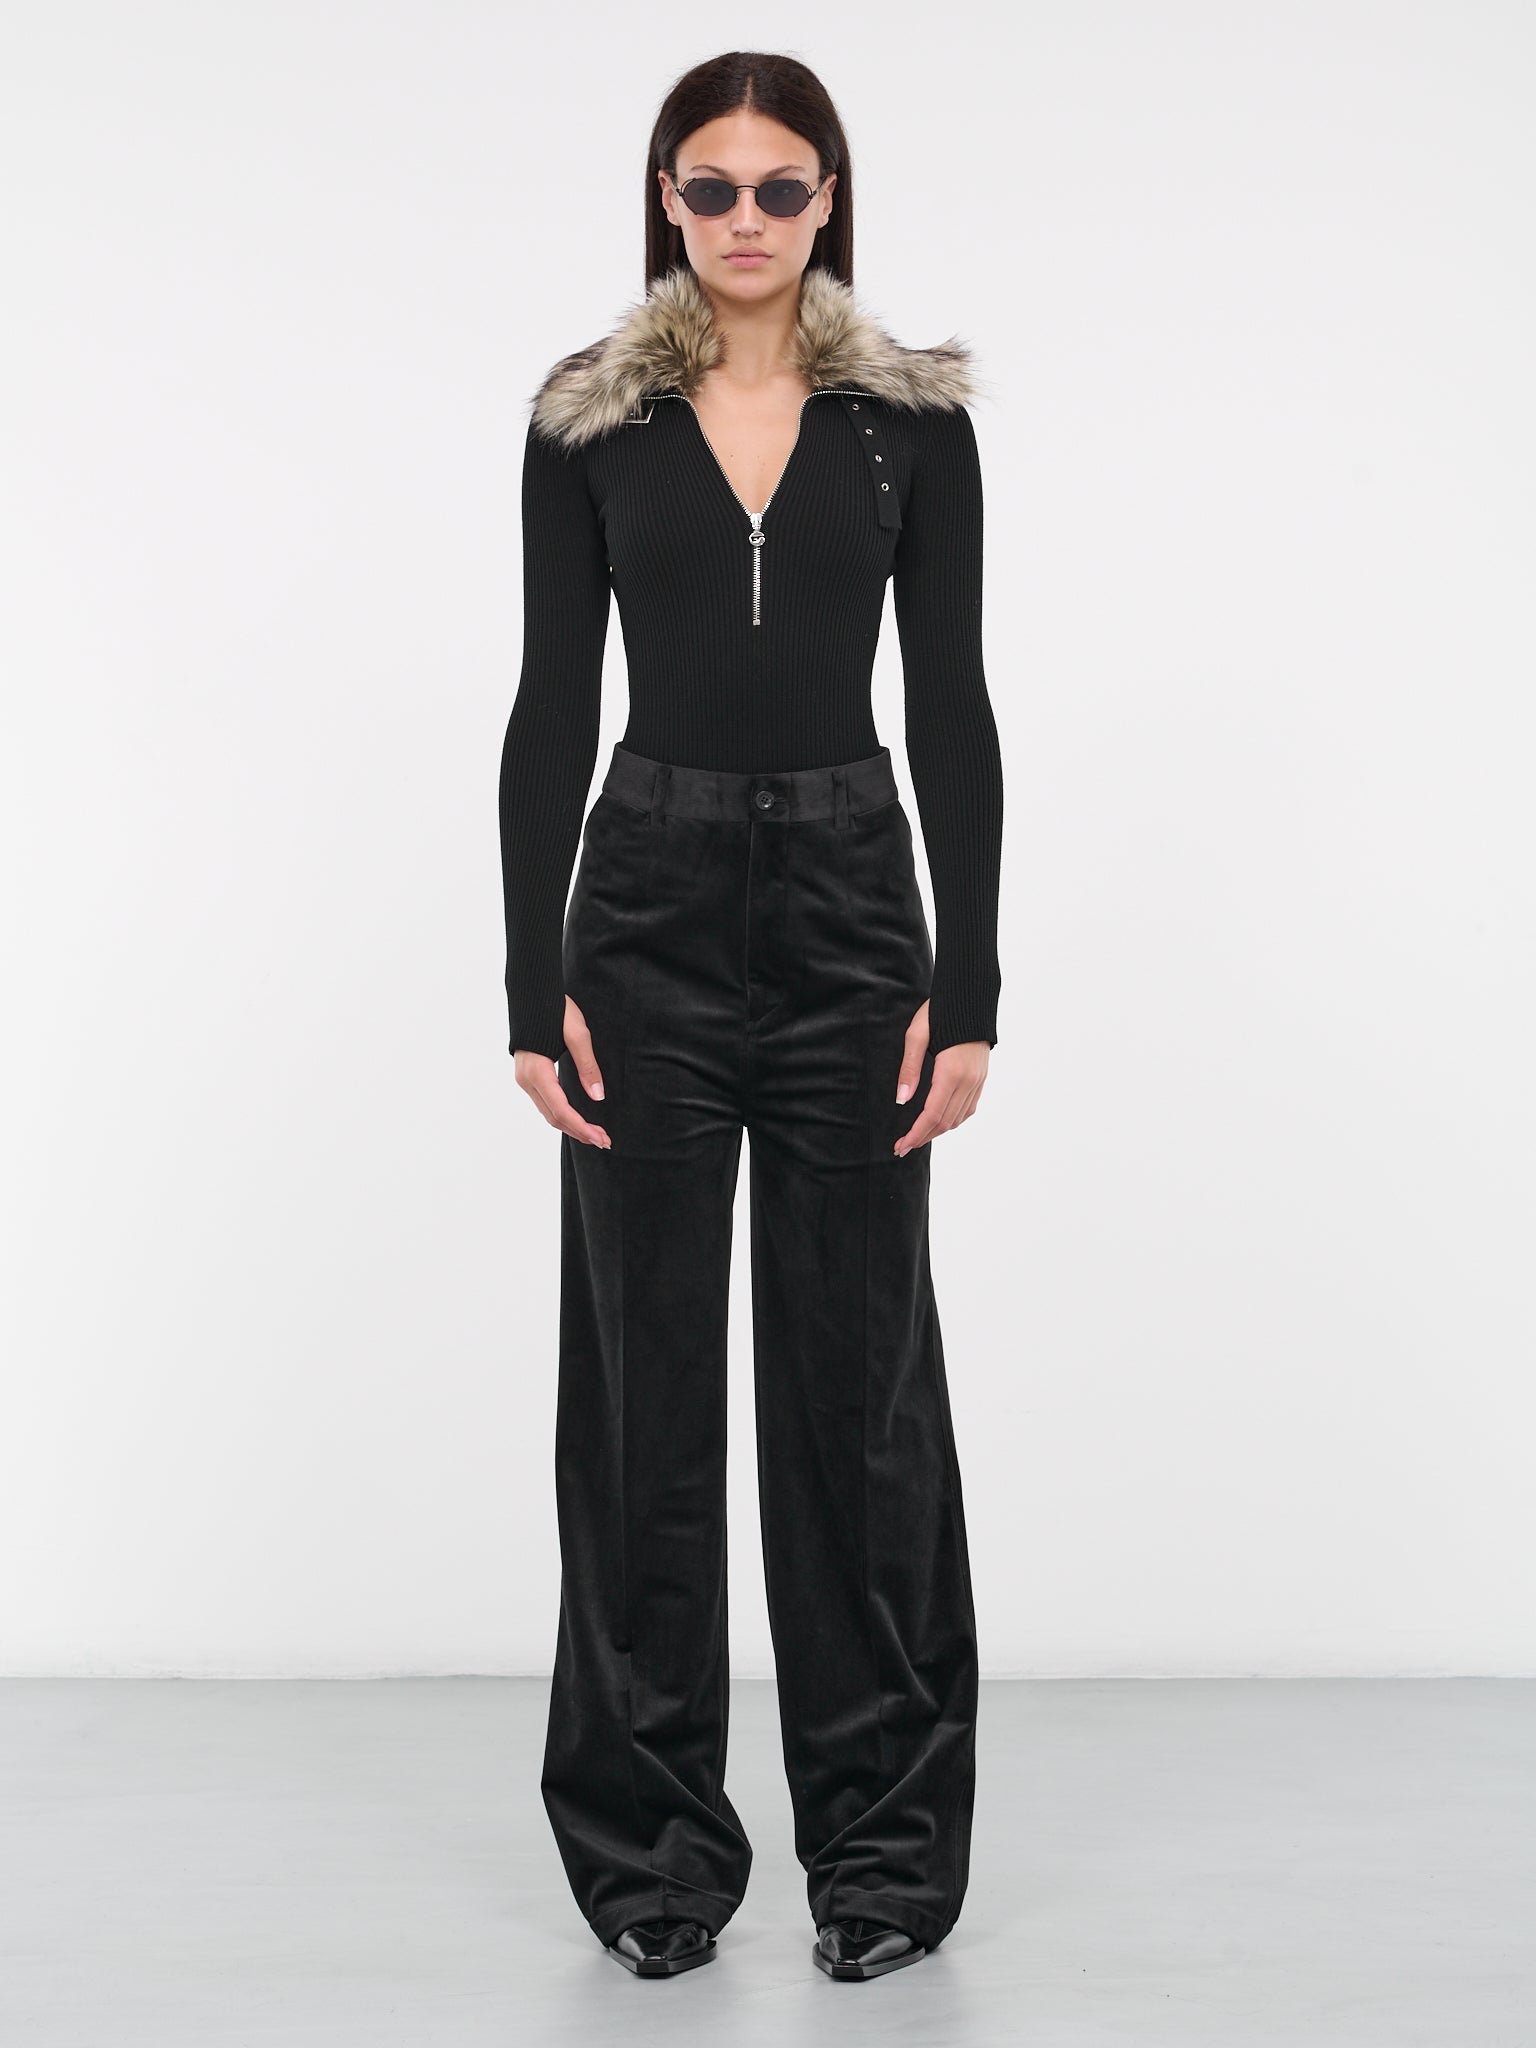 Inside Out Trousers (SY-P6C-BLACK)